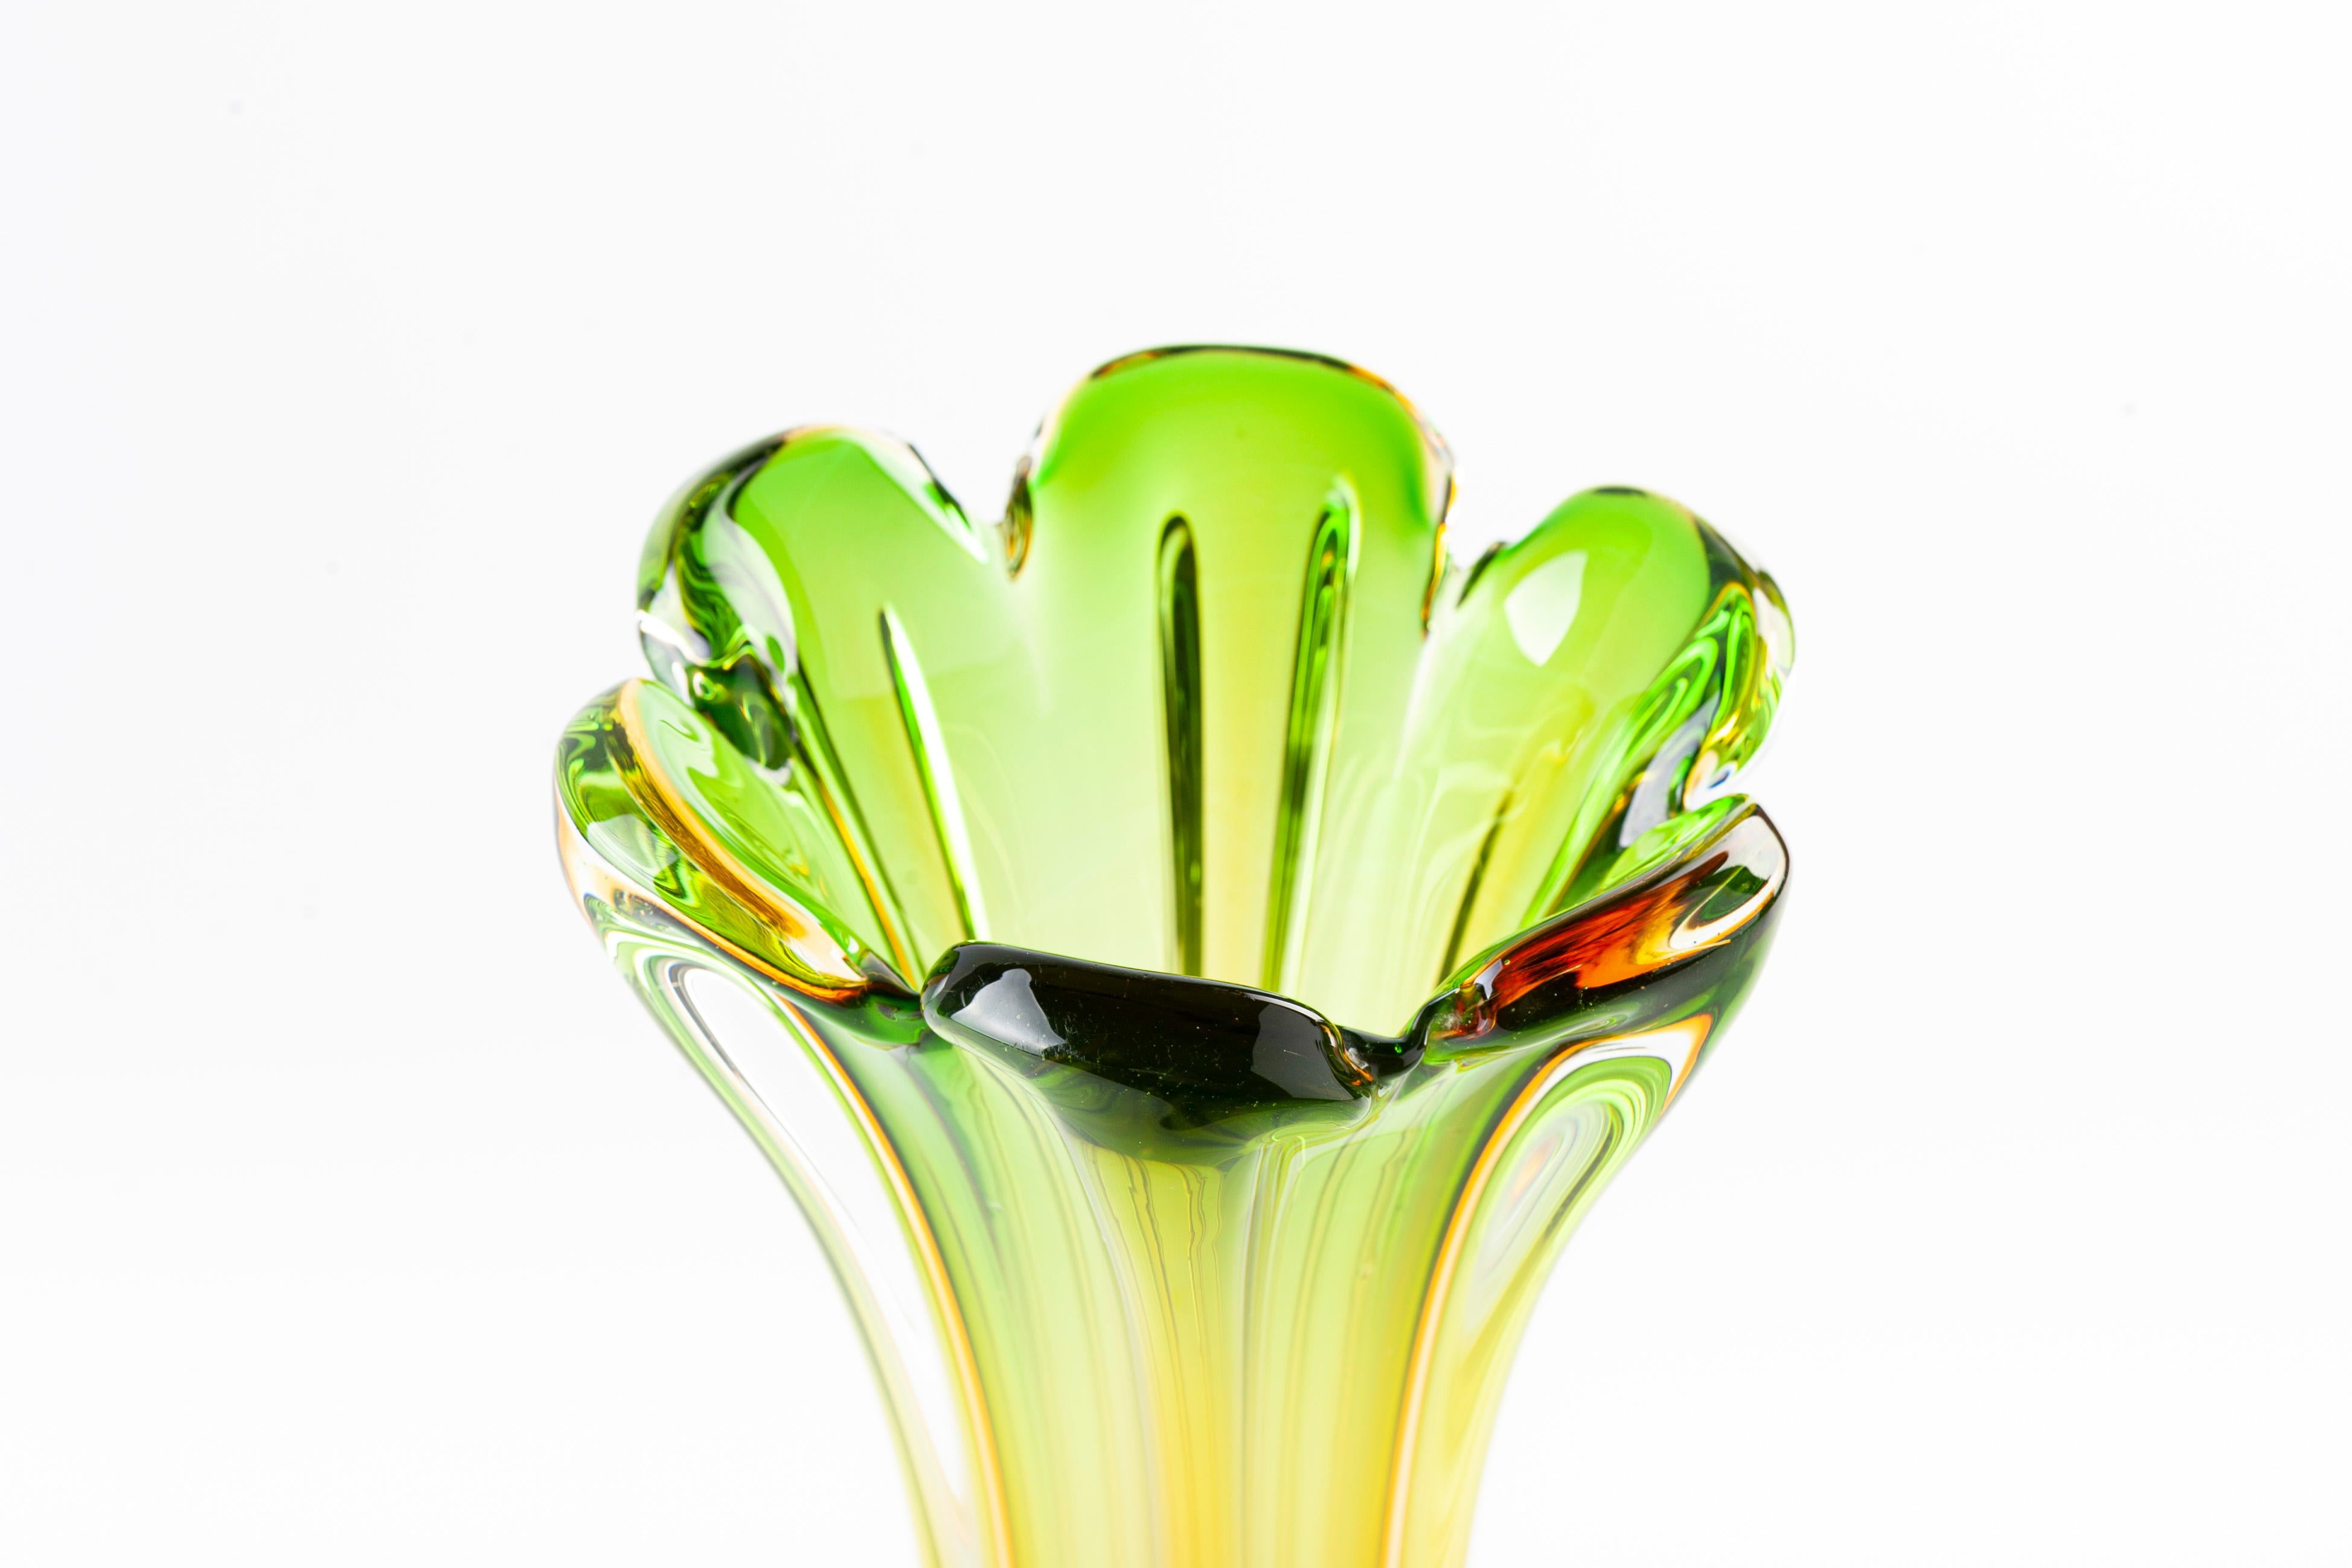 This vintage glass vase with the color of green, yellow and orange faded away, realized in Northern Europe during the 1970s.

Excellent condition.

This object is shipped from Italy. Under existing legislation, any object in Italy created over 70